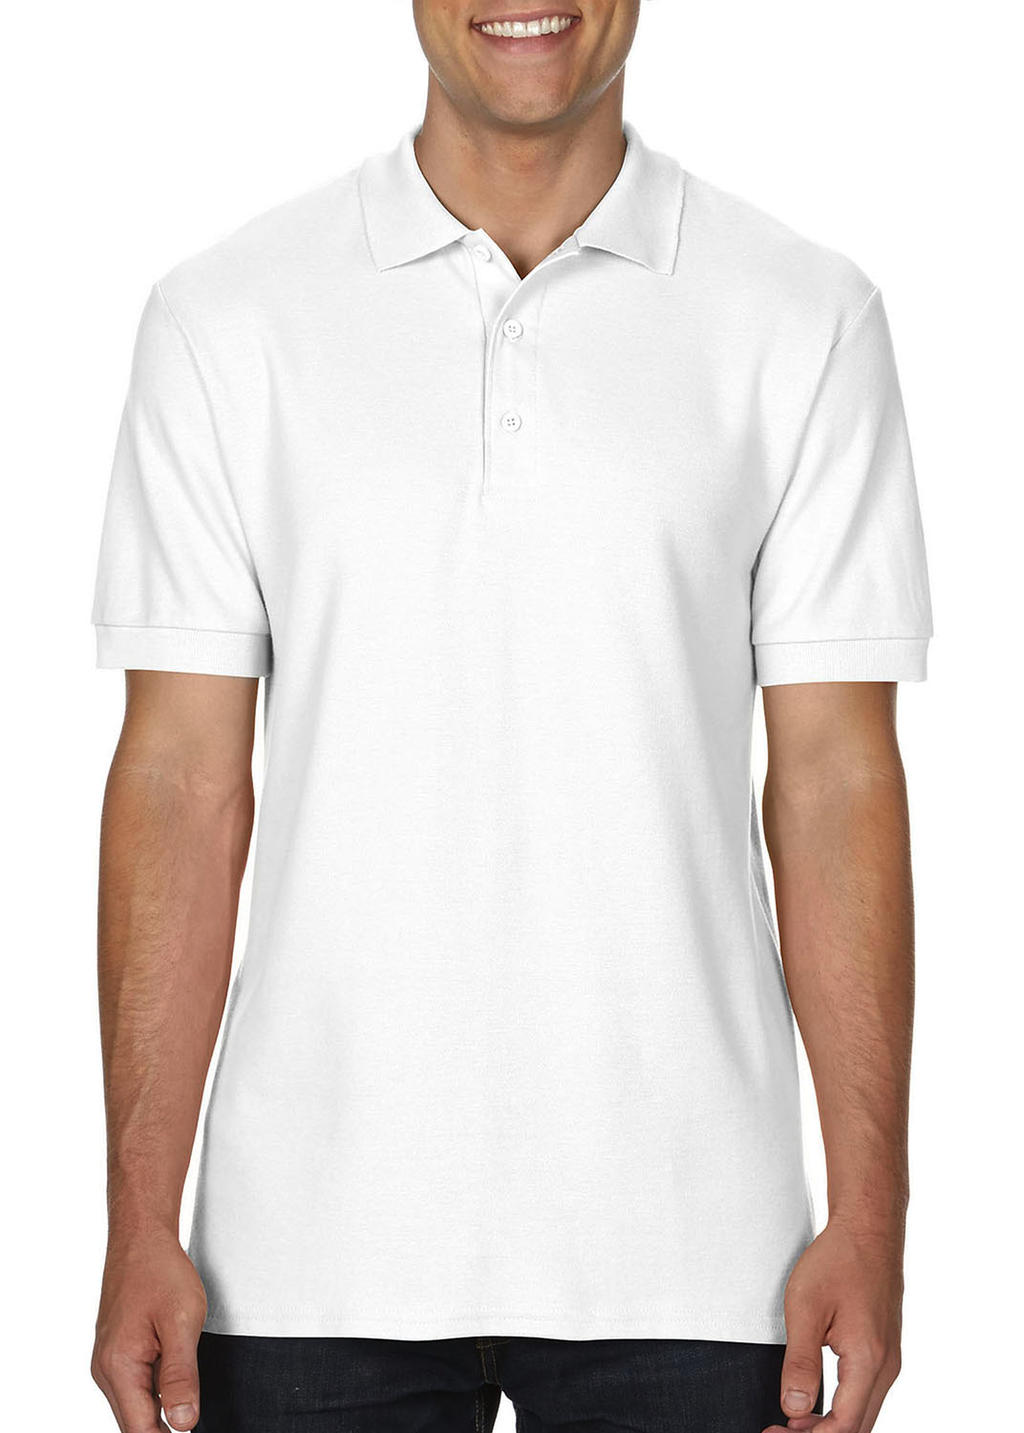 Hammer Adult Pique Polo